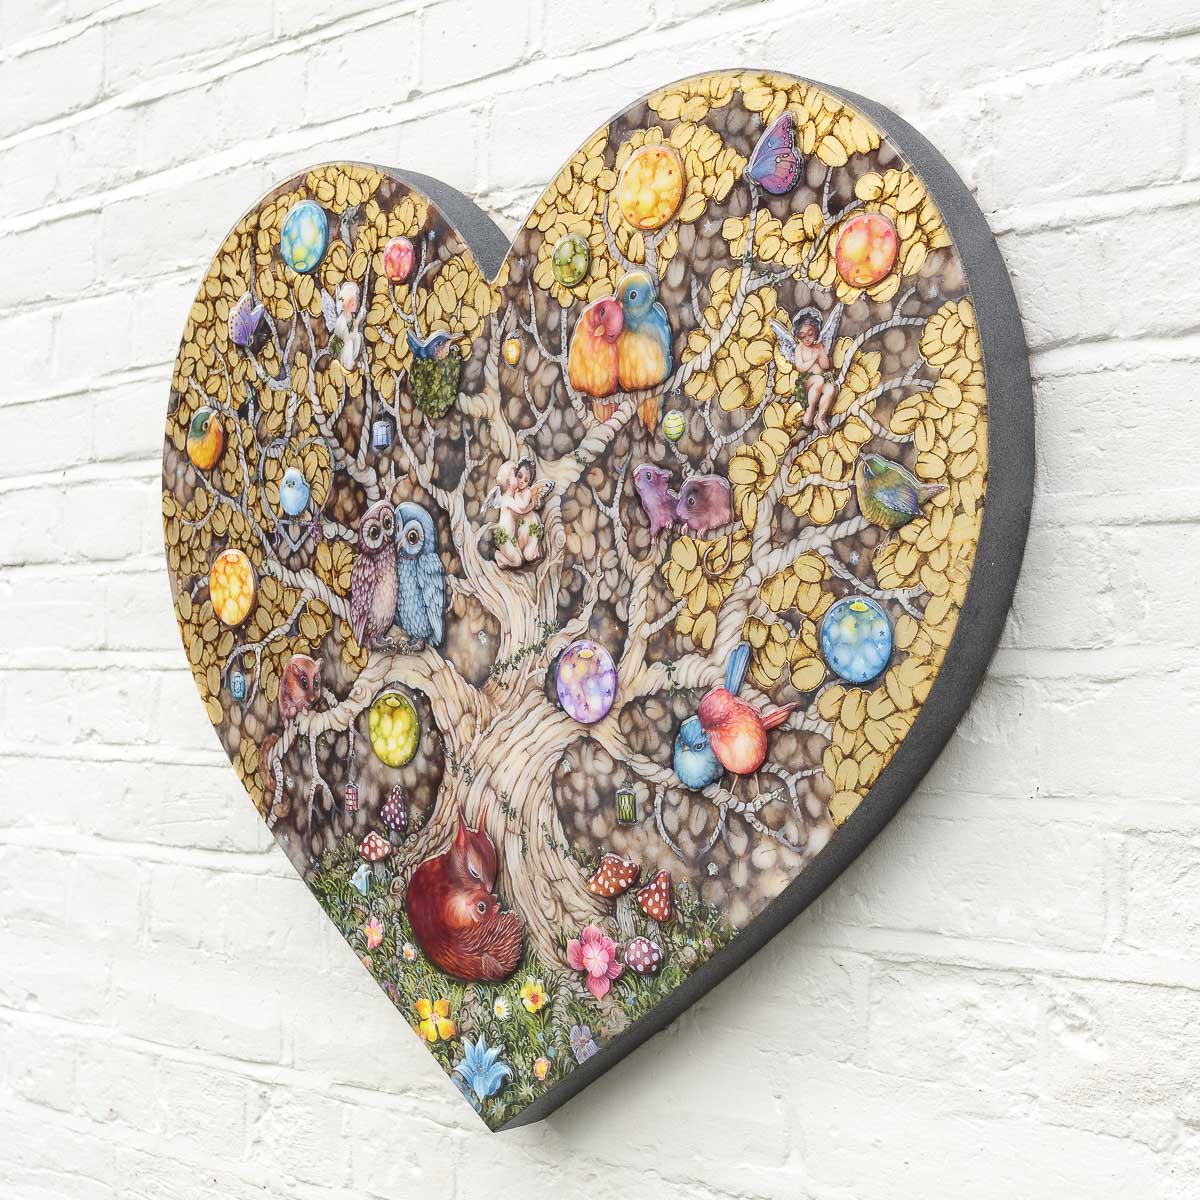 Heart Of The Woodland - Edition Kerry Darlington Unique Edition